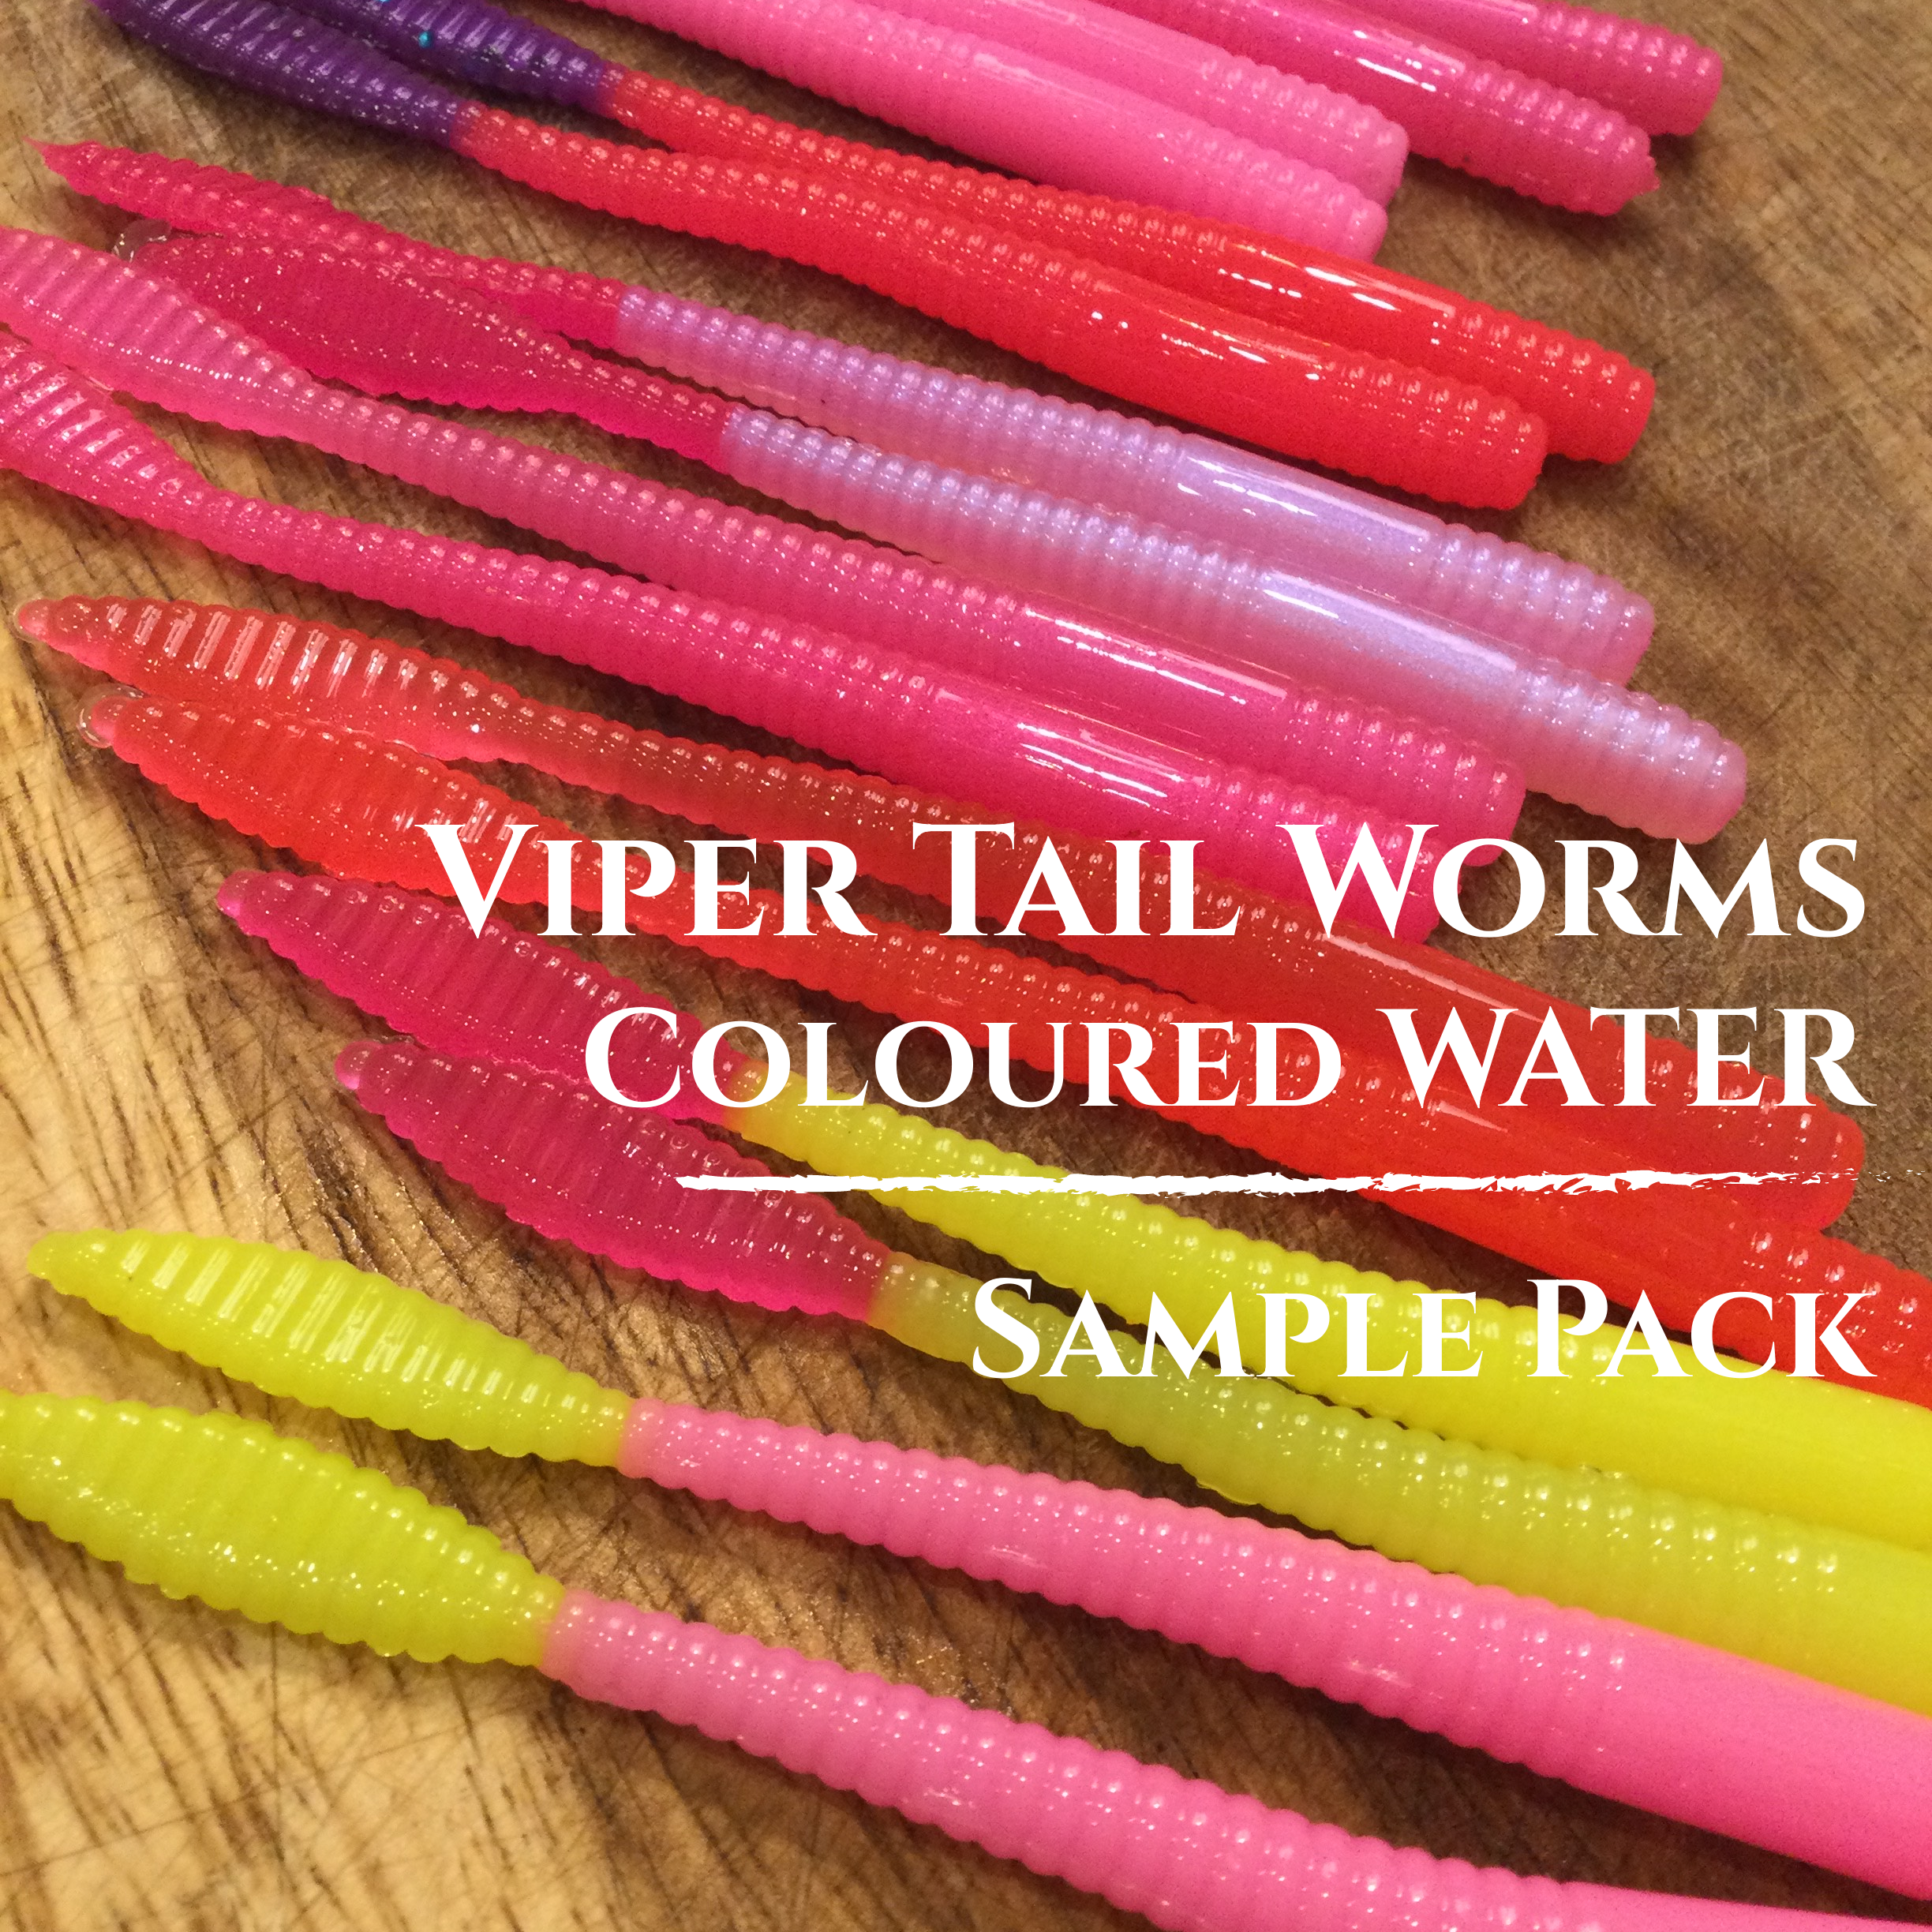 Viper Tail Worm, Coloured Water Sample Pack